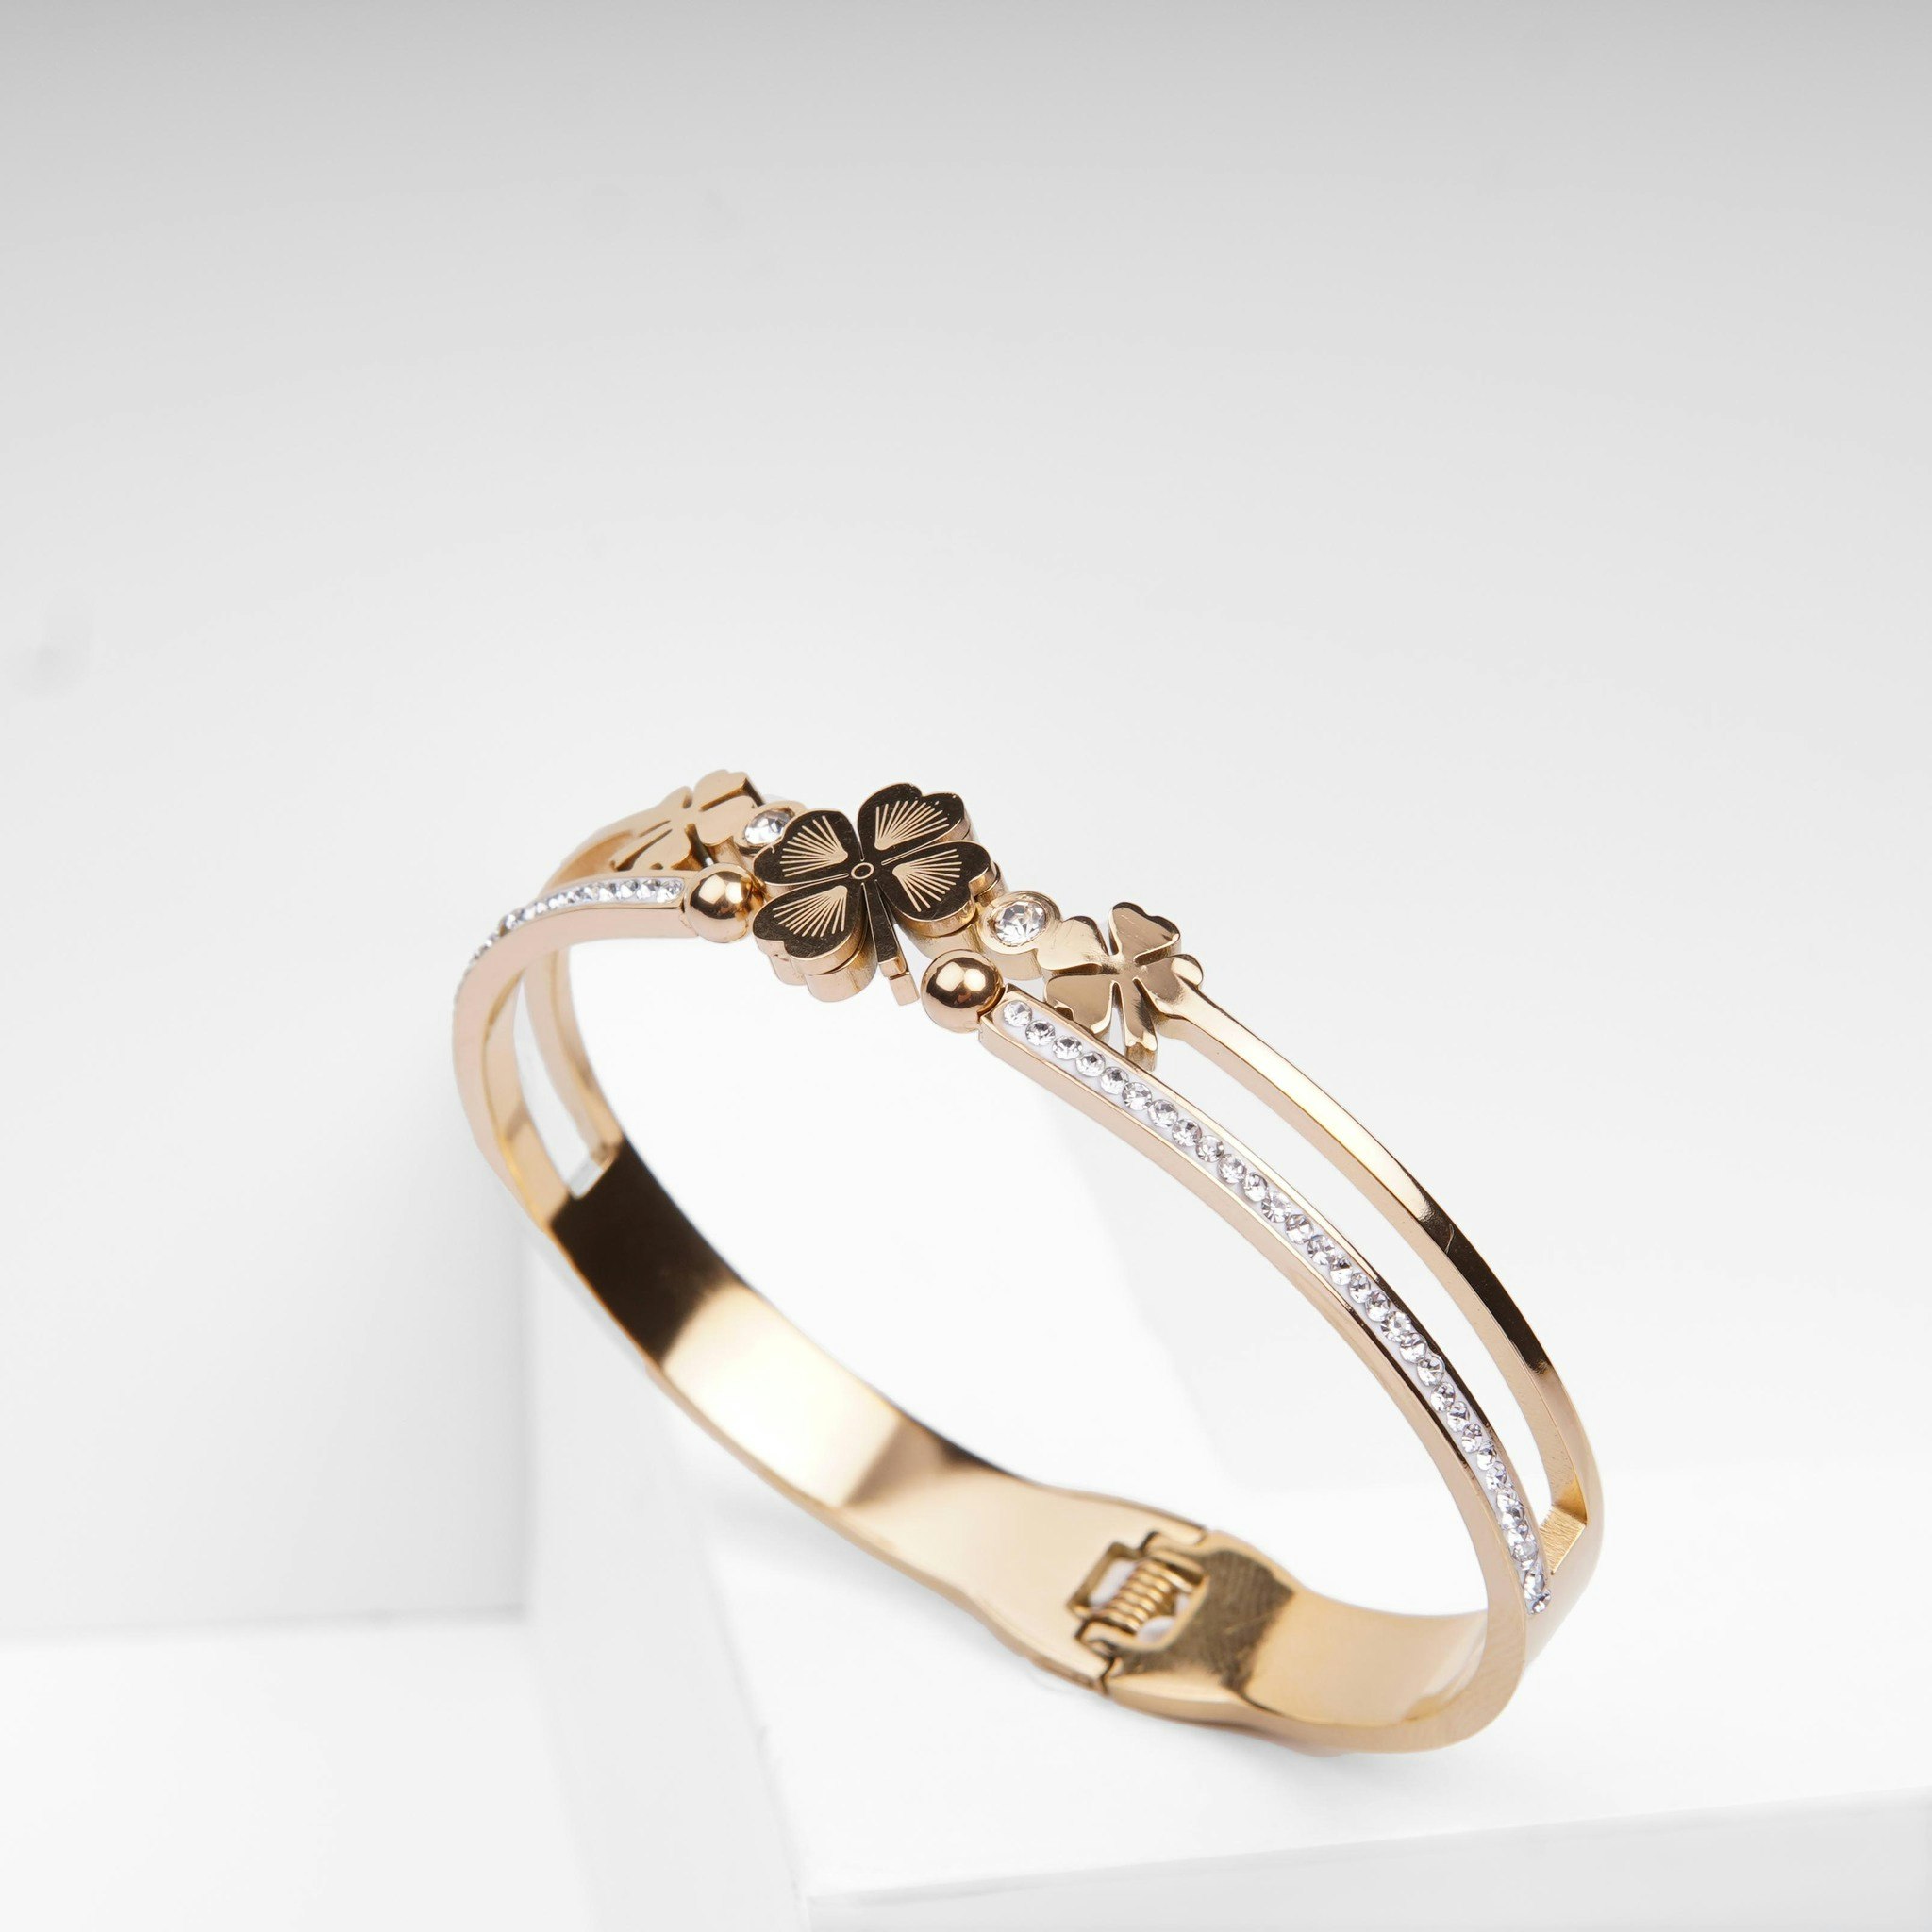 Clover Luxurious Limited Edition - Gold Edition Bracelet Ladies - SWEVALI